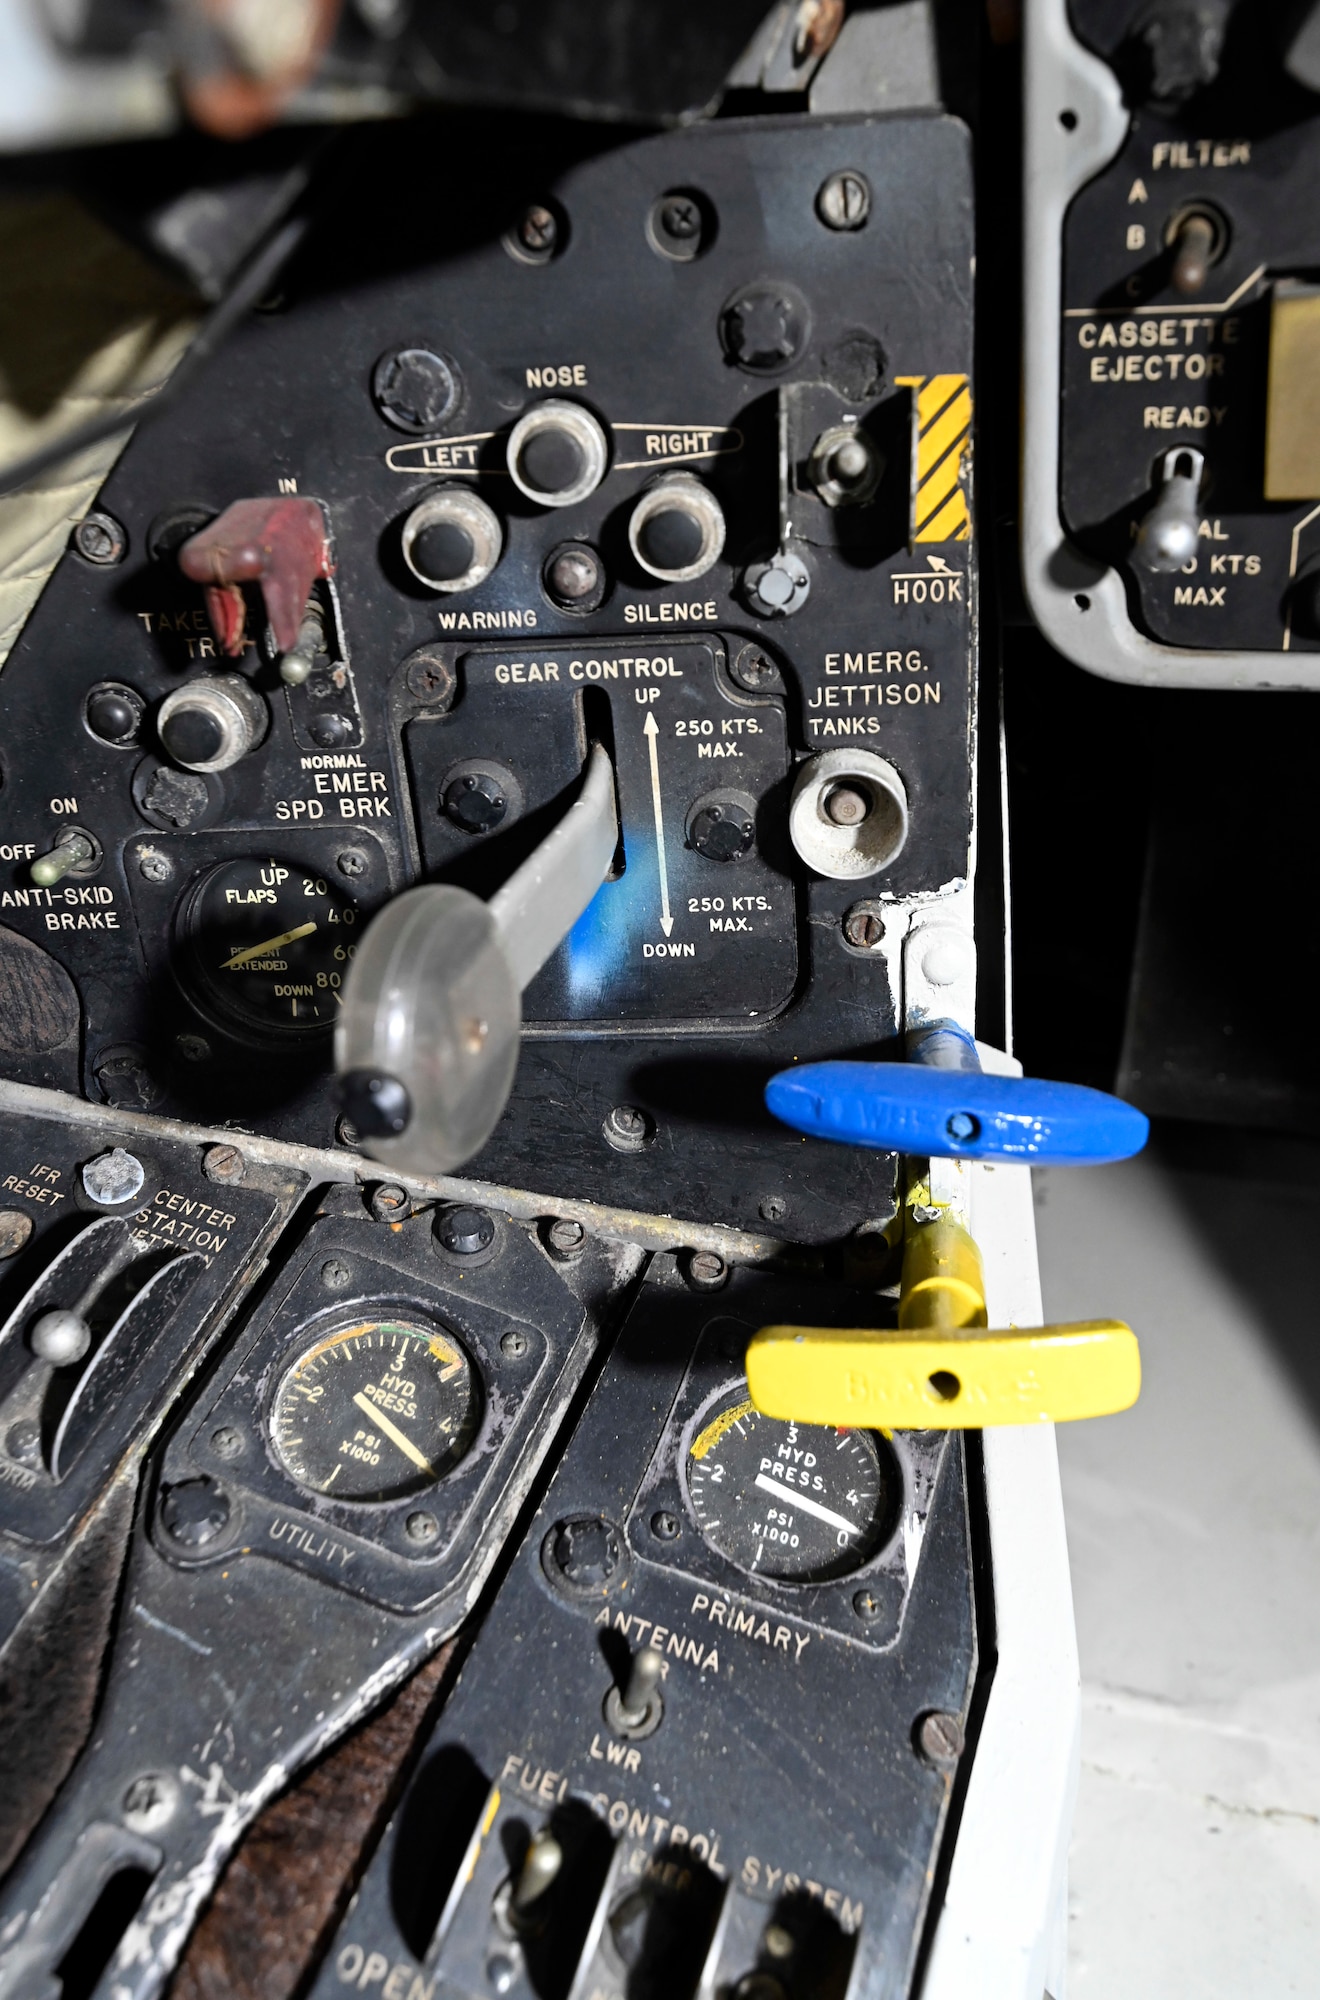 cockpit views of the McDonnell RF-101C Voodoo